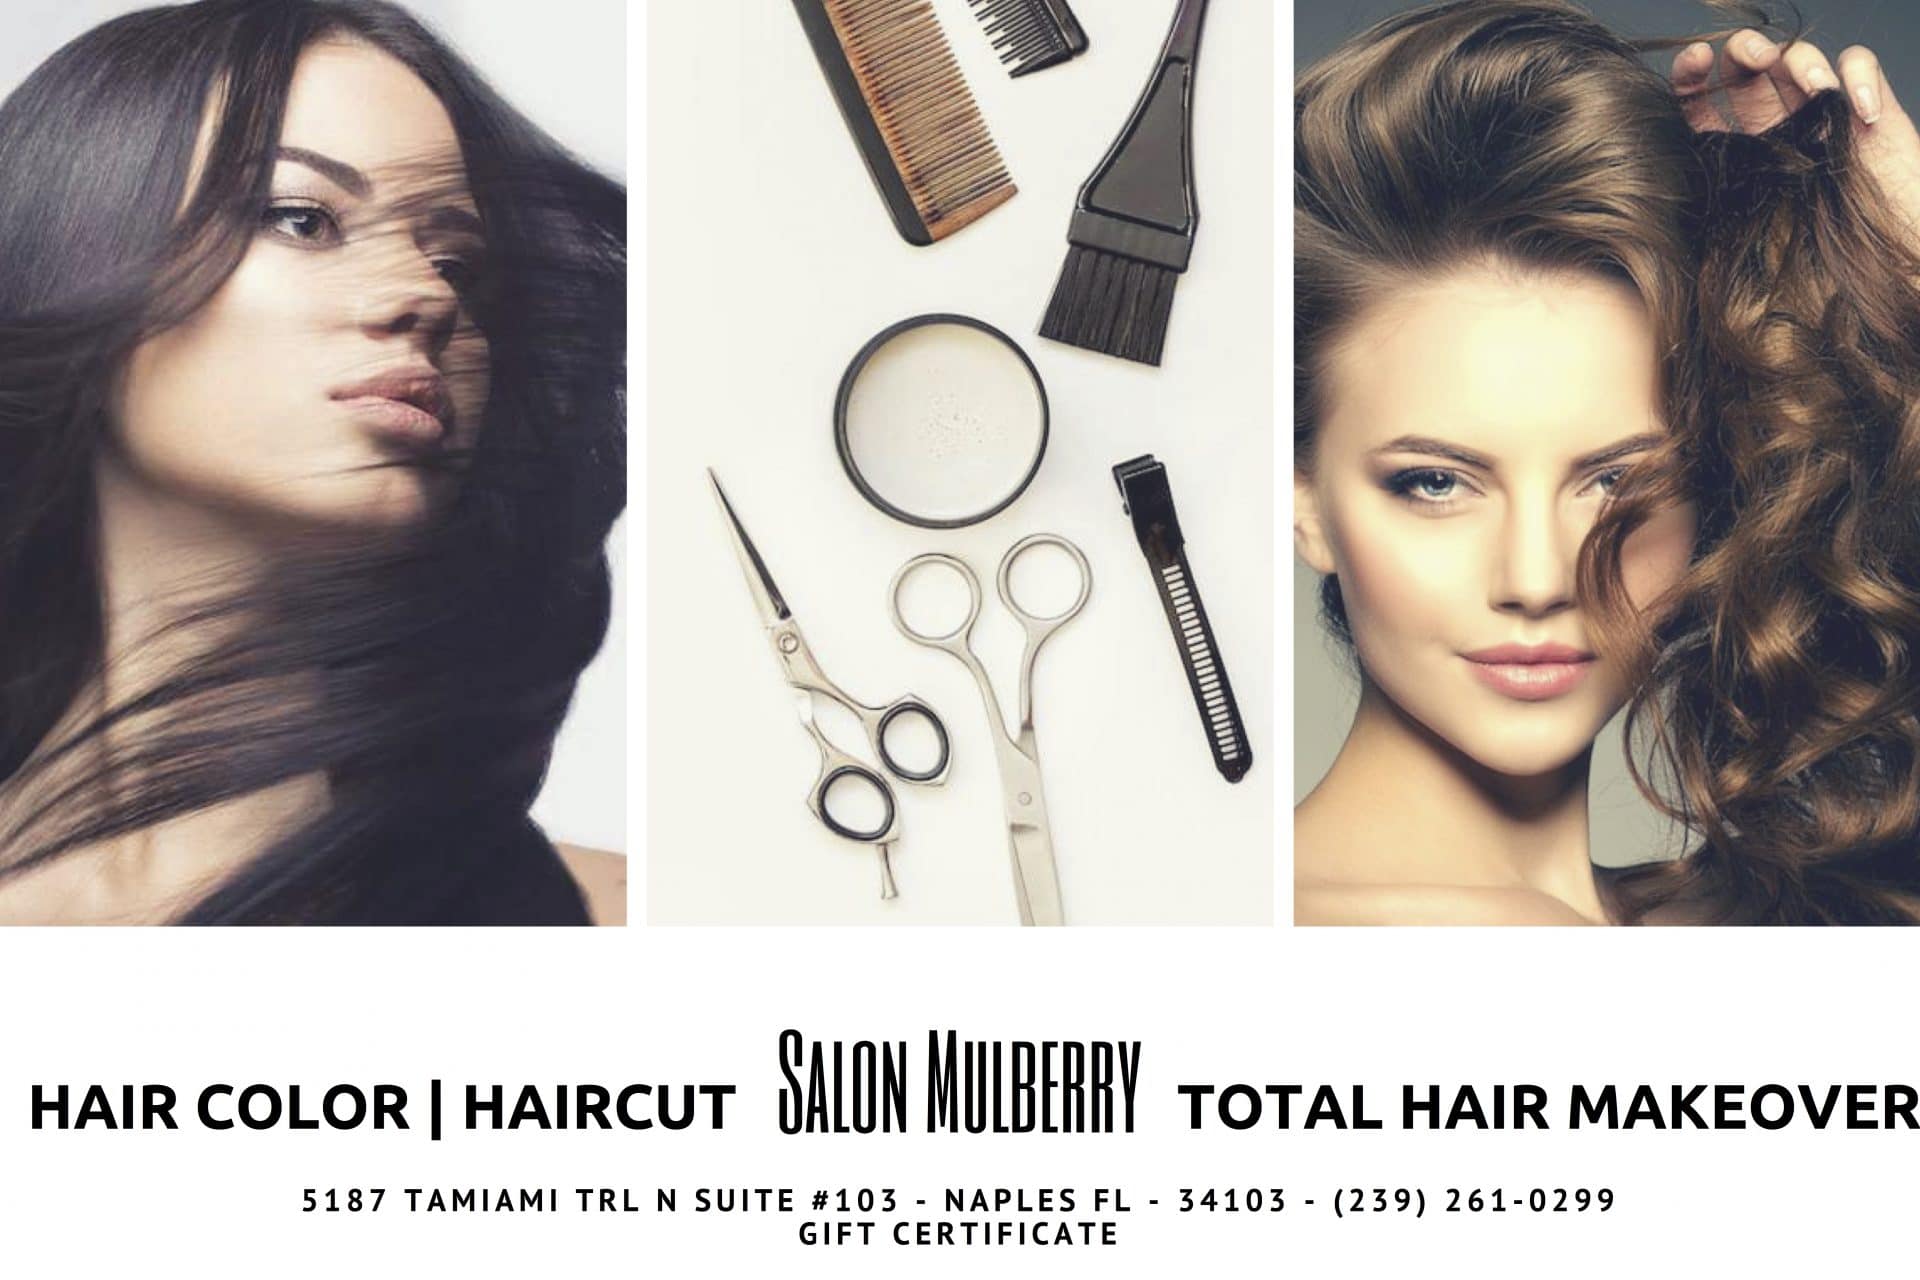 Salon Mulberry Gift Certificate Total Hair Makeover